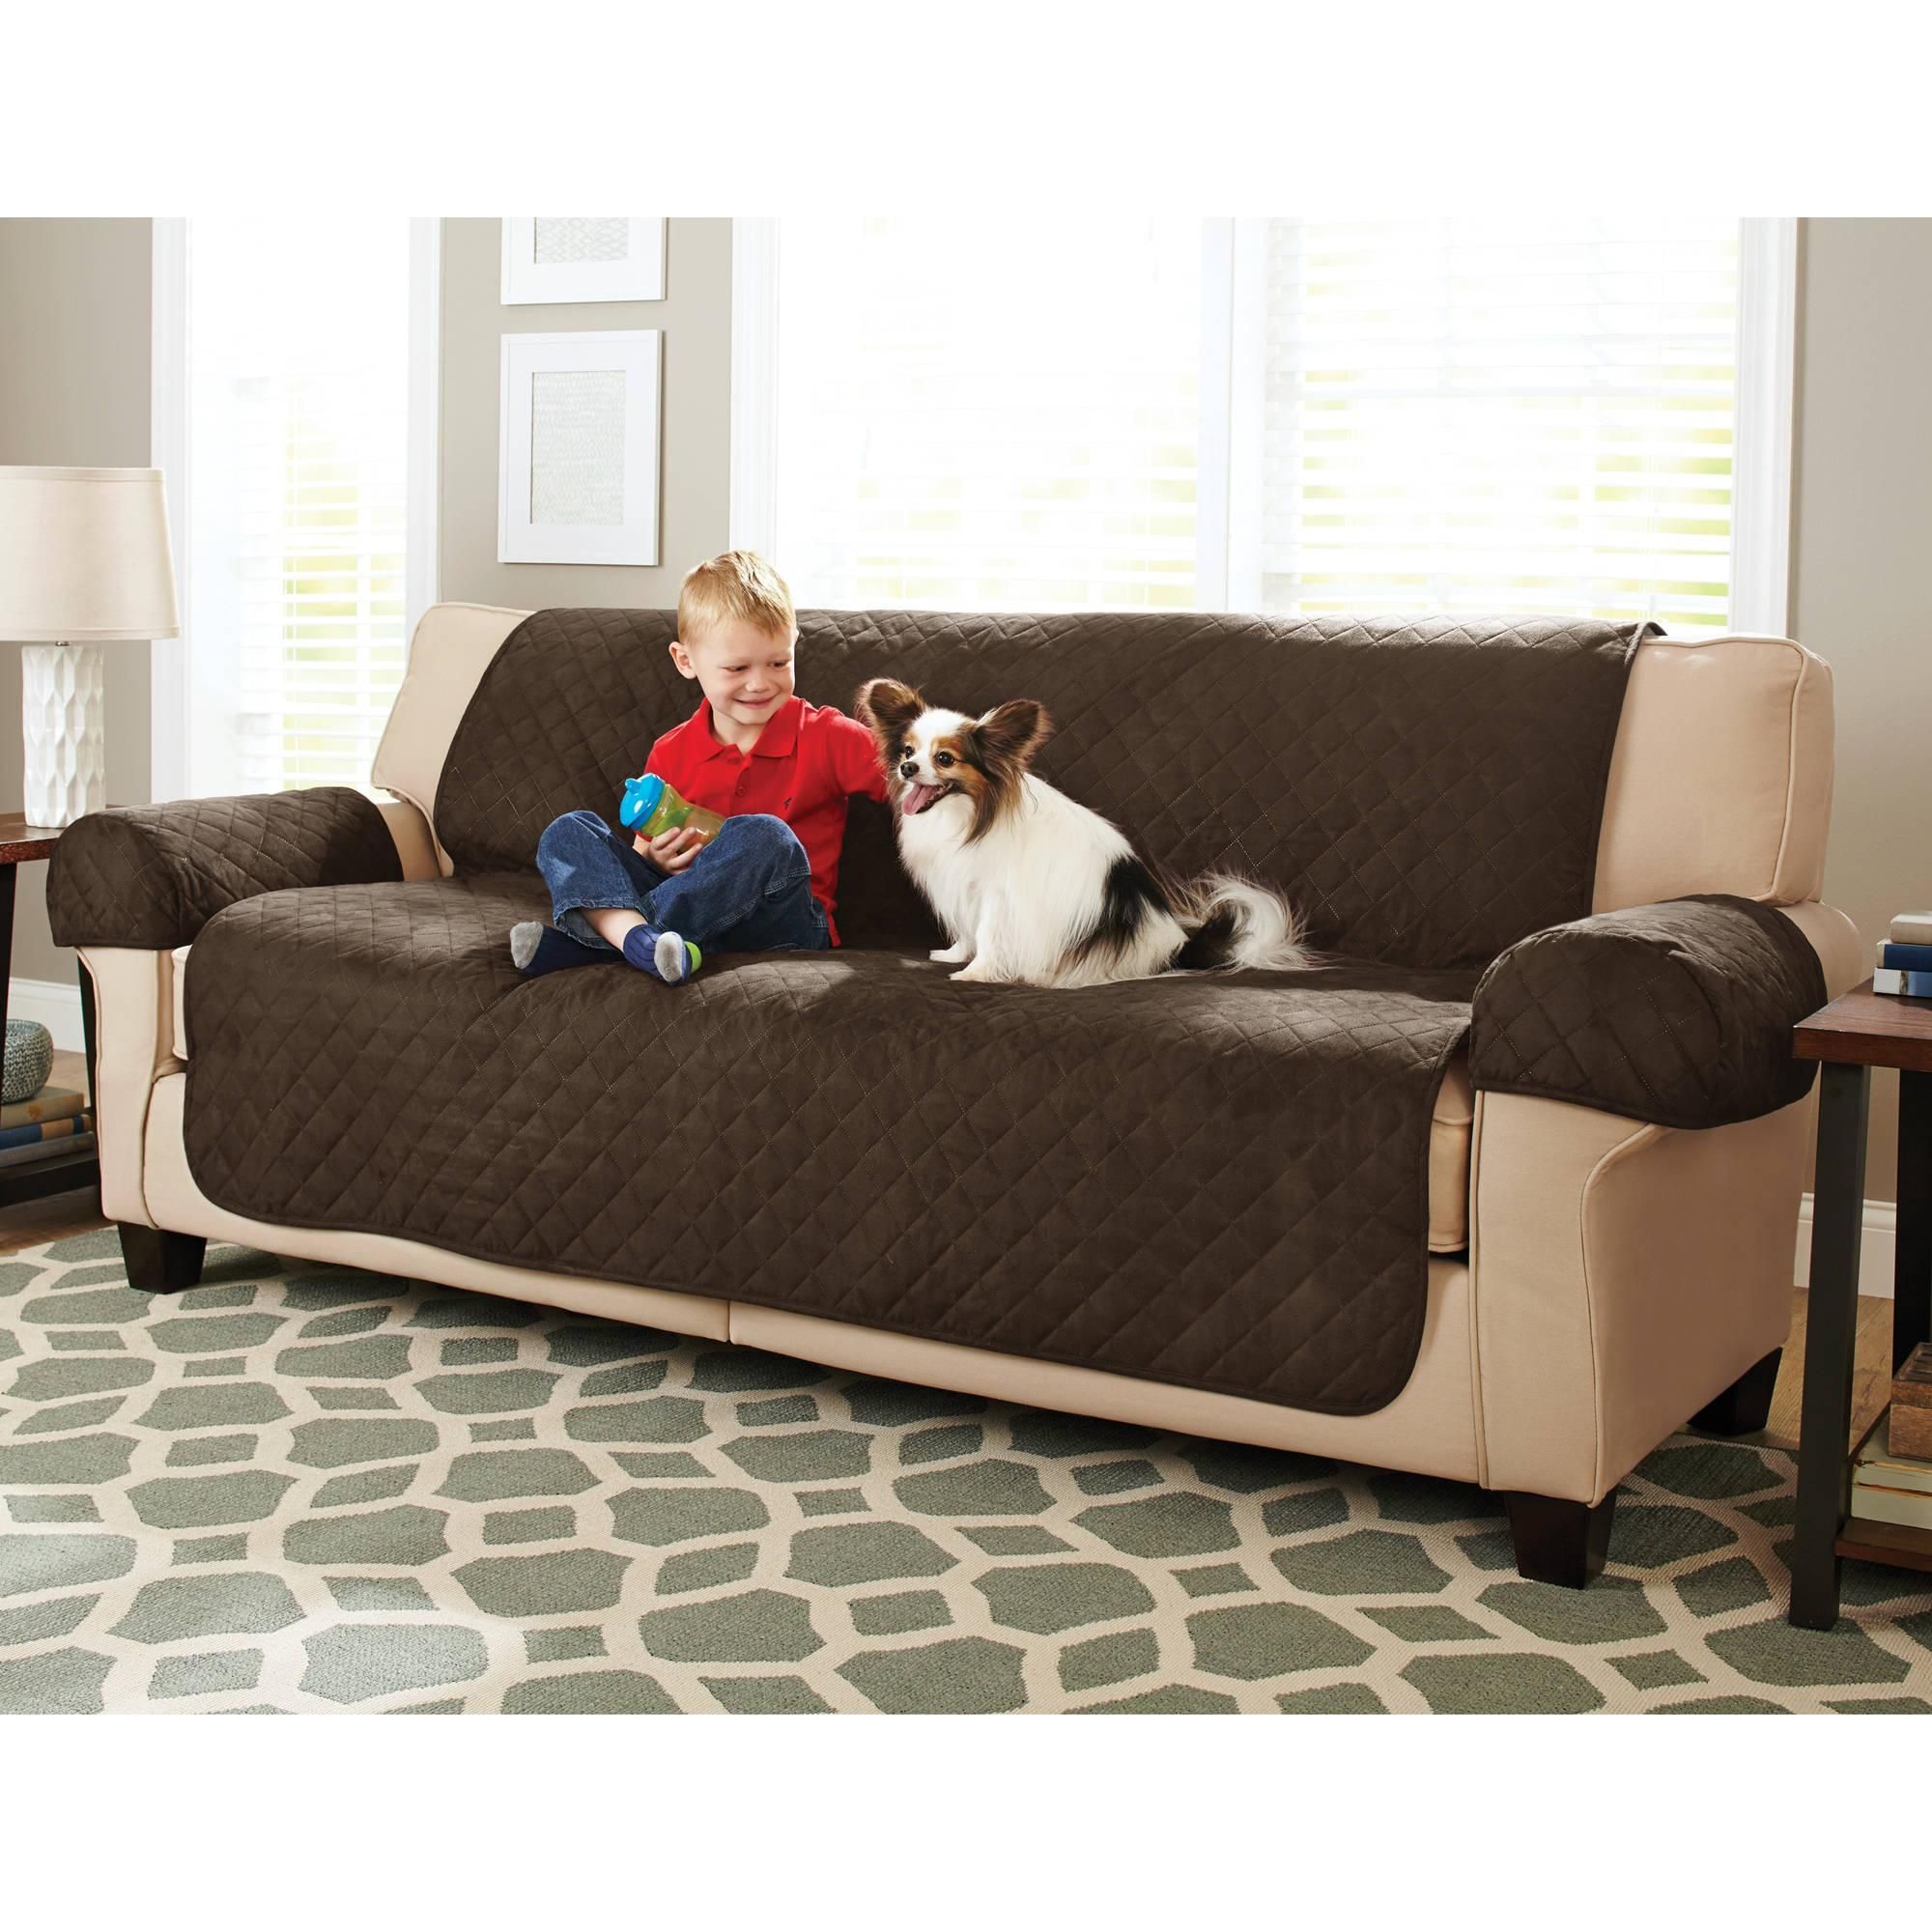 Maytex Waterproof Non Slip Faux Suede Pet/furniture Loveseat Cover With Sofa Settee Covers (Photo 1 of 22)